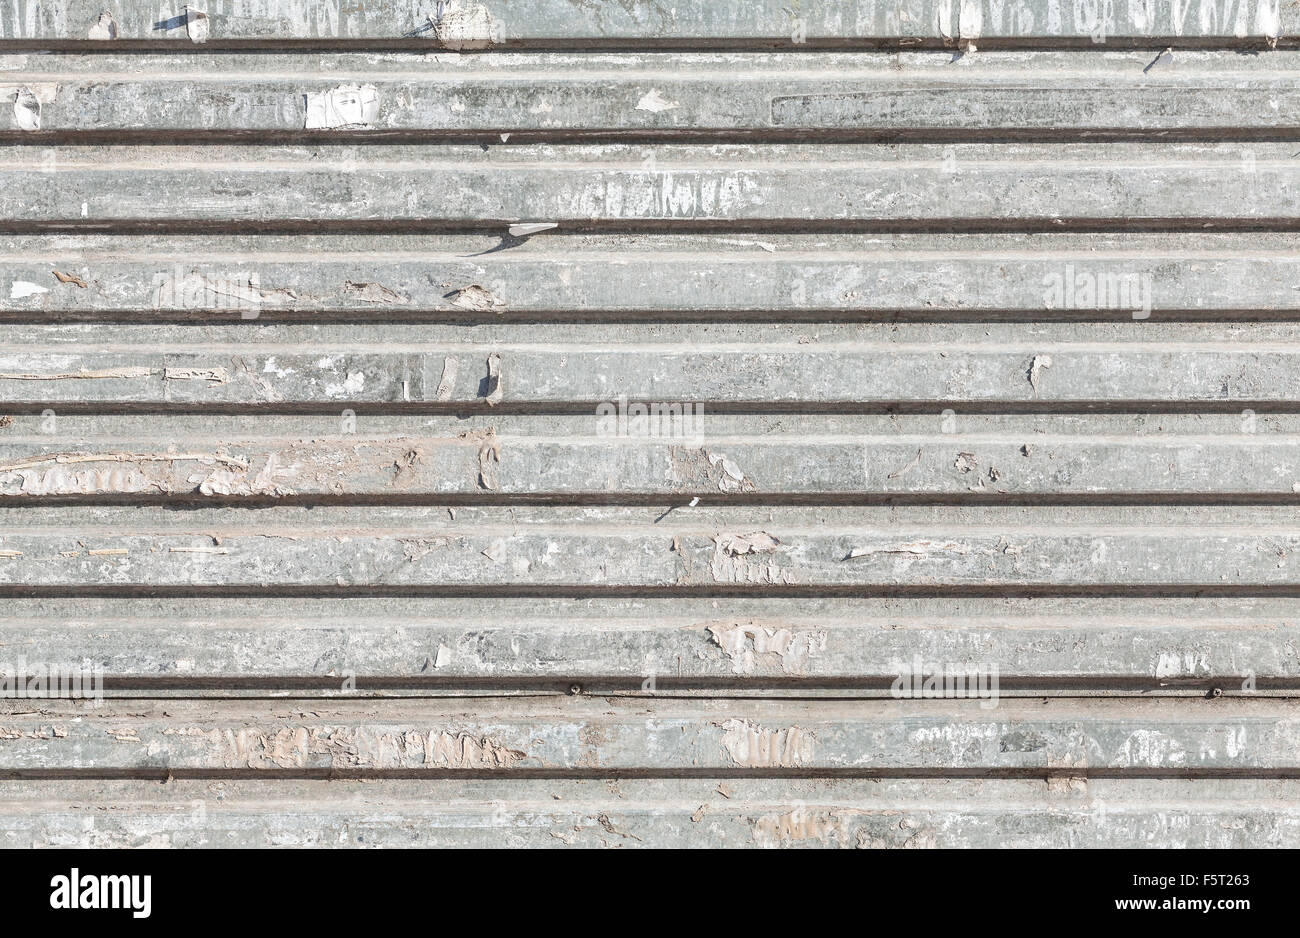 Grunge corrugated metal texture, abstract industrial background. Stock Photo